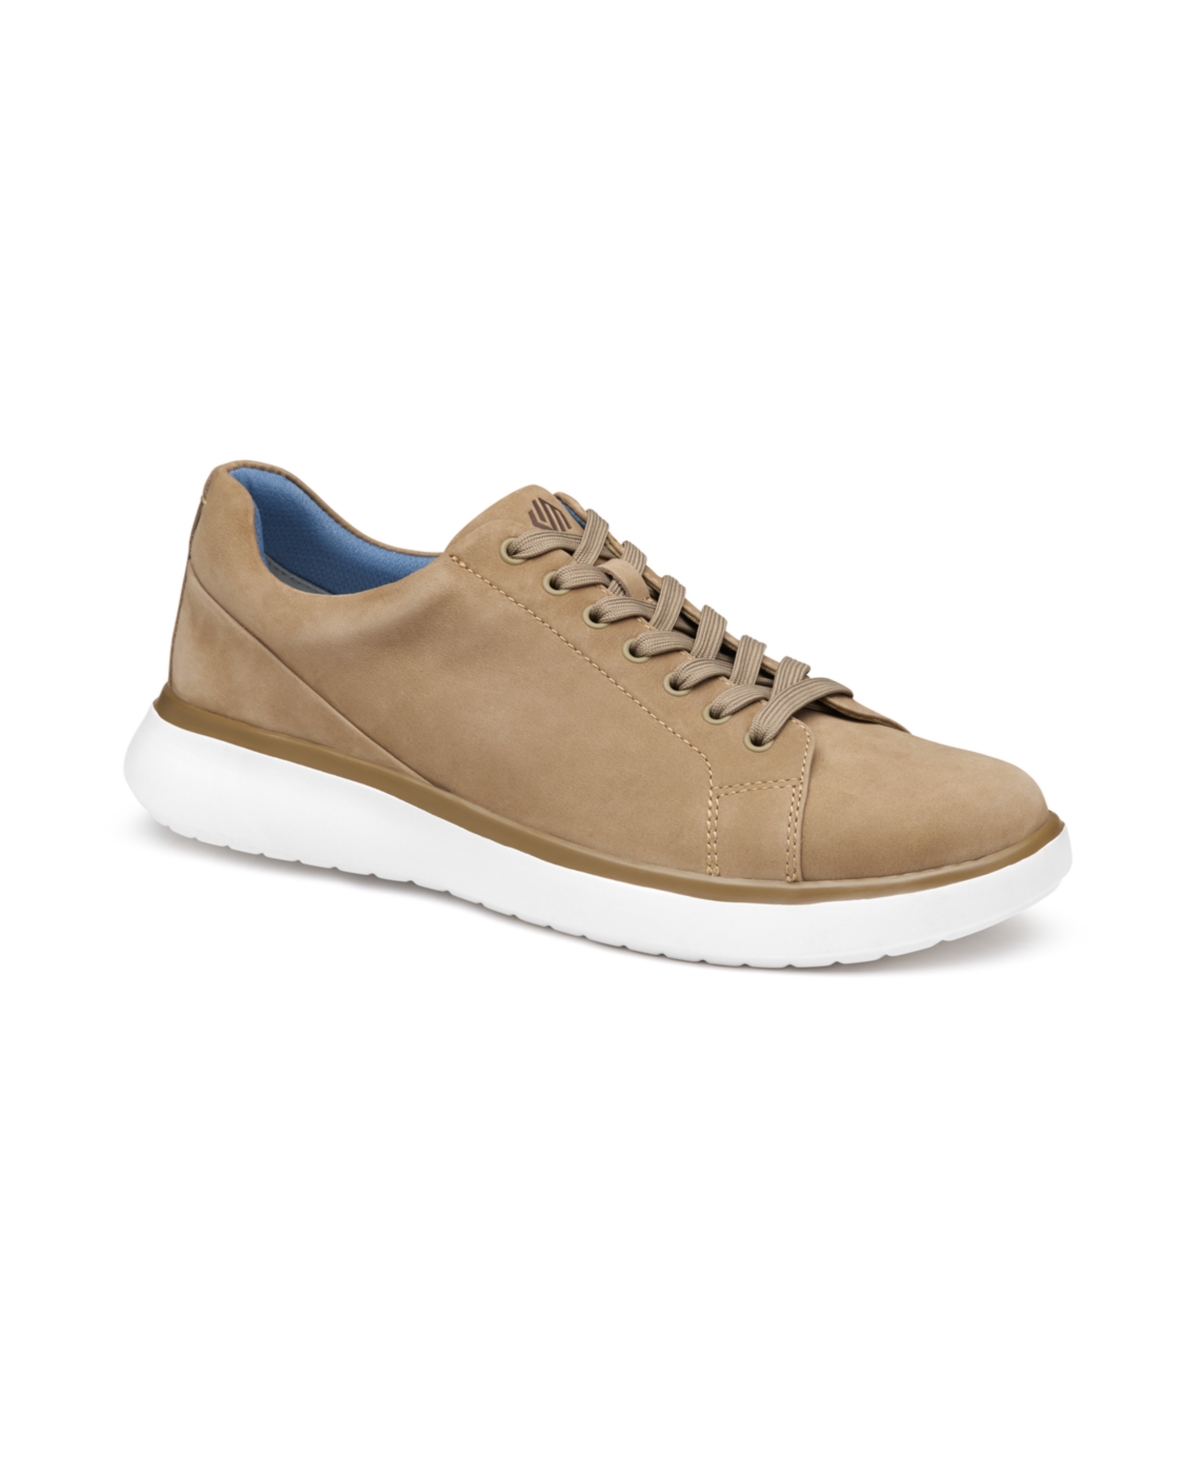 Men's Oasis Lace-To-Toe Sneakers - Taupe